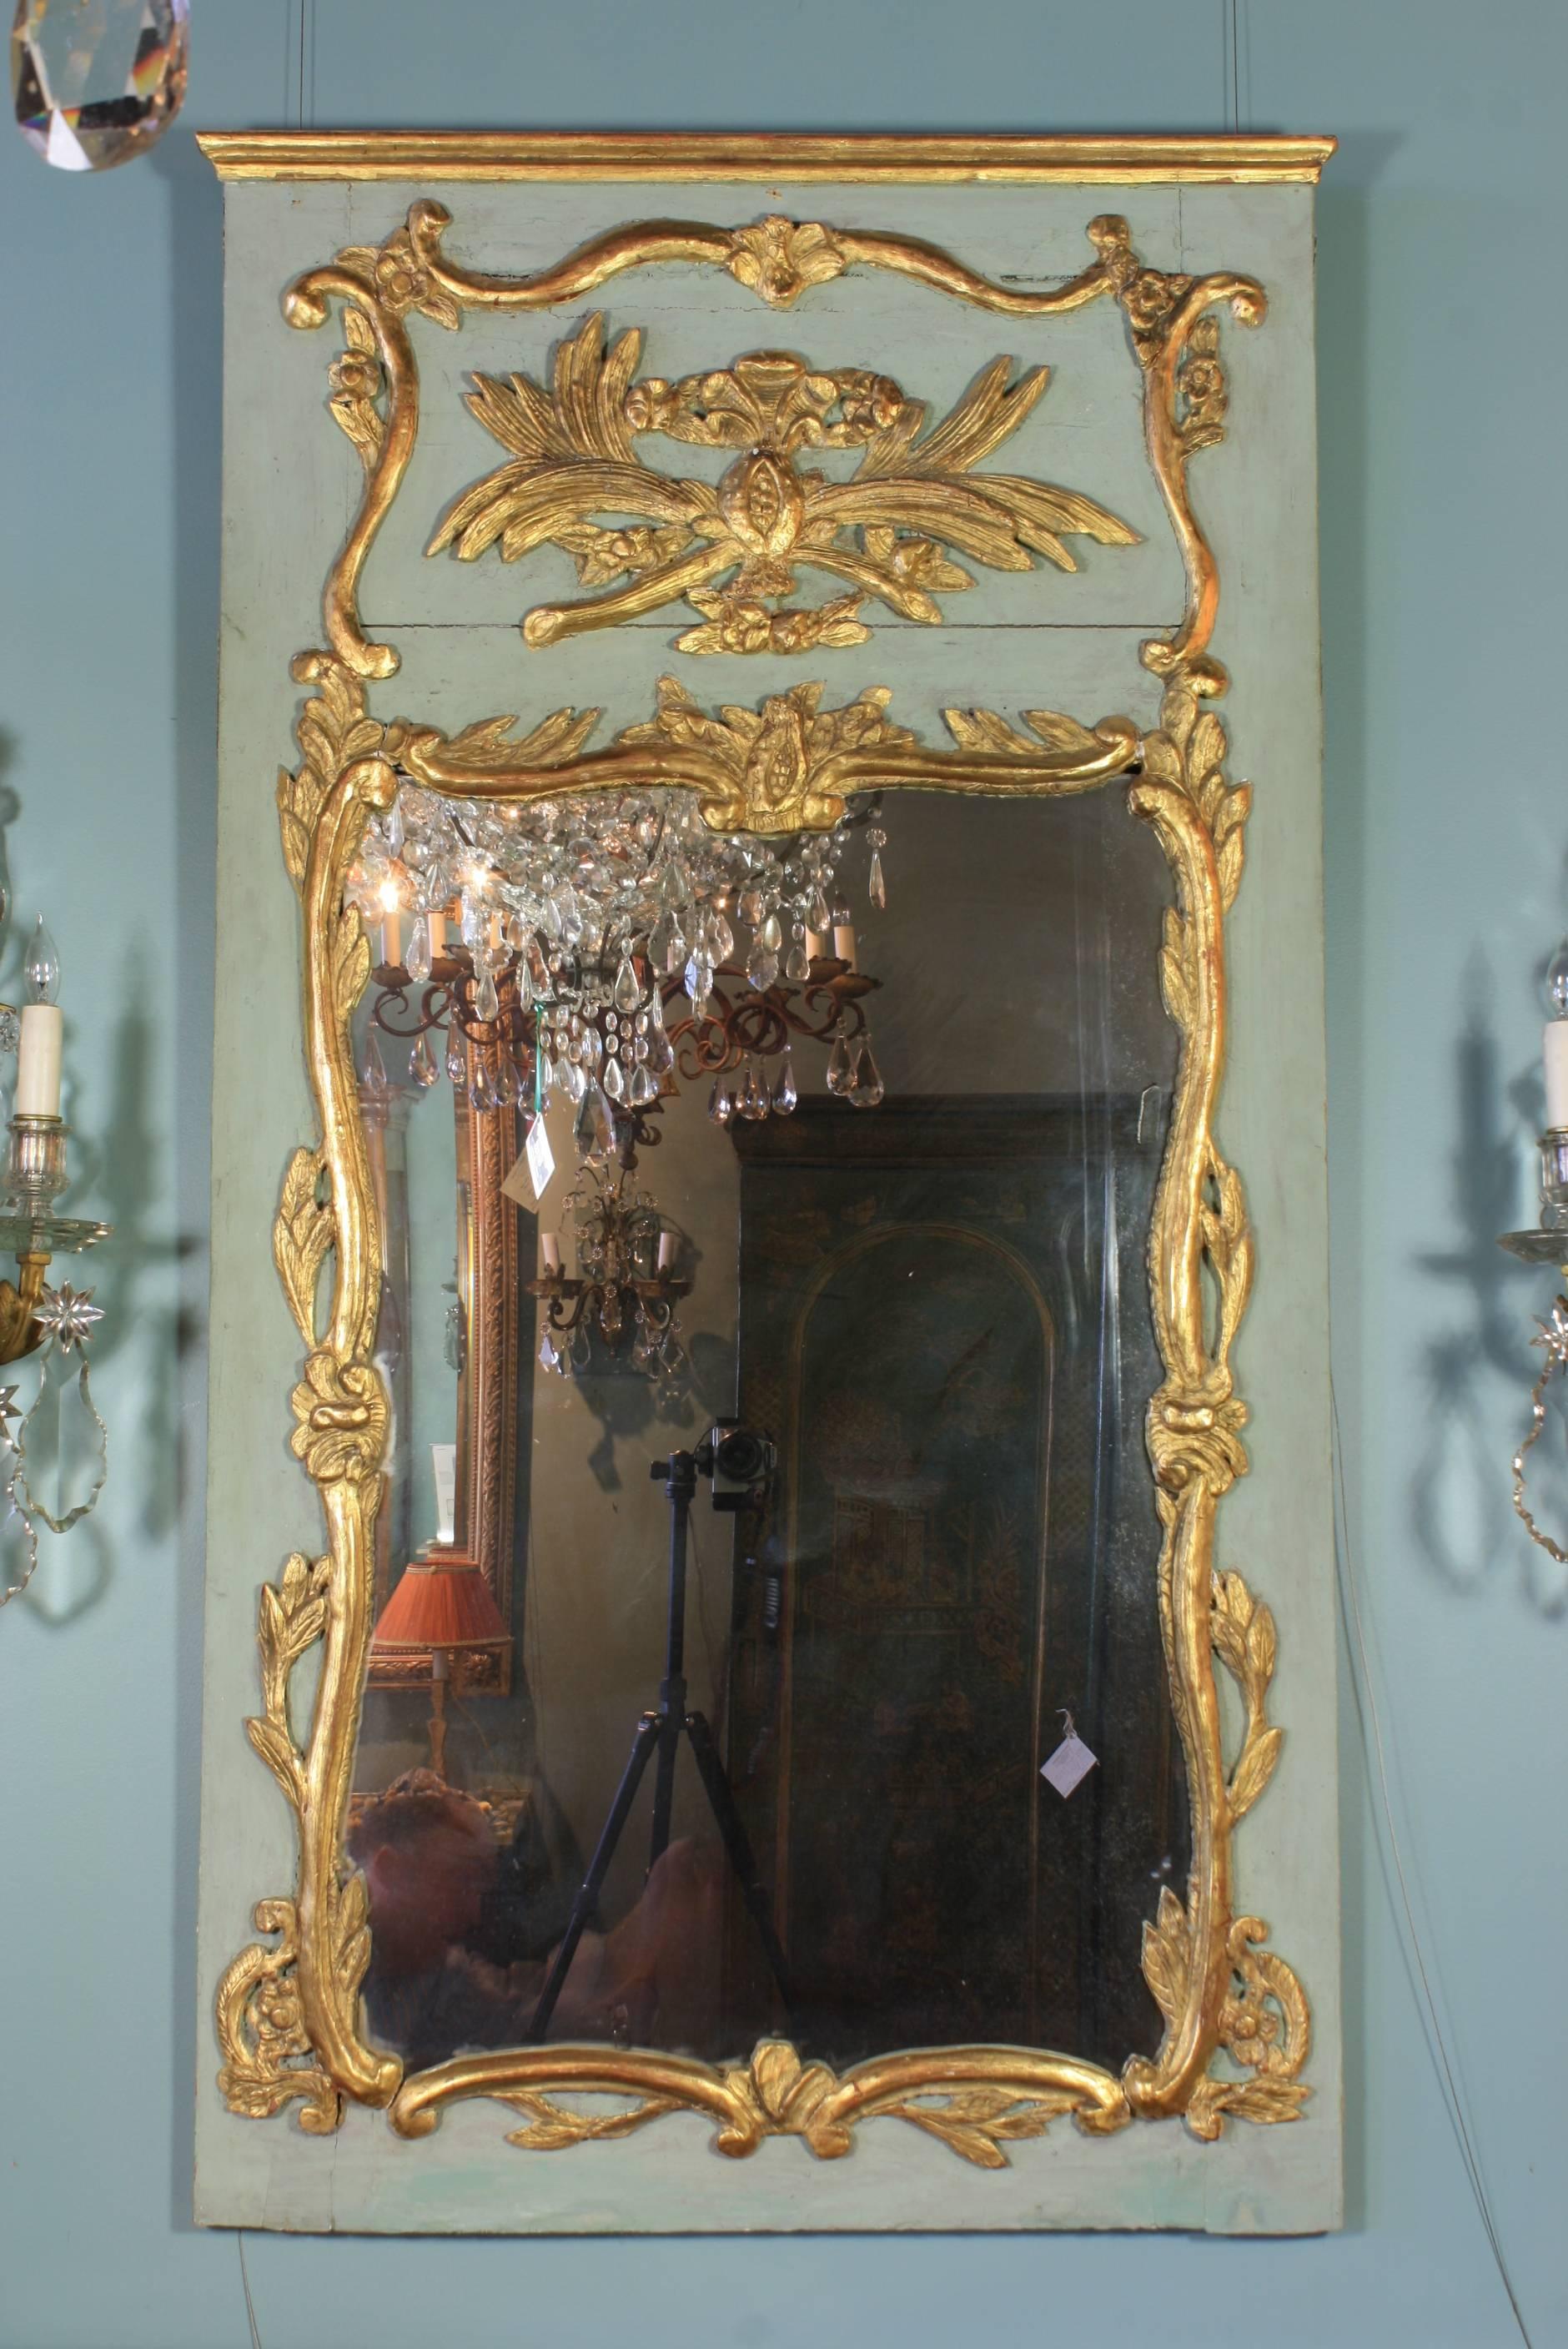 French Louis XV period trumeau mirror (circa 1750) from Normandy, painted and parcel gilt with stylized pomegranates, scrolls, flowers, leaves and other Rococo ornaments. The mirror glass is old and mirror has wooden back. Background paint and